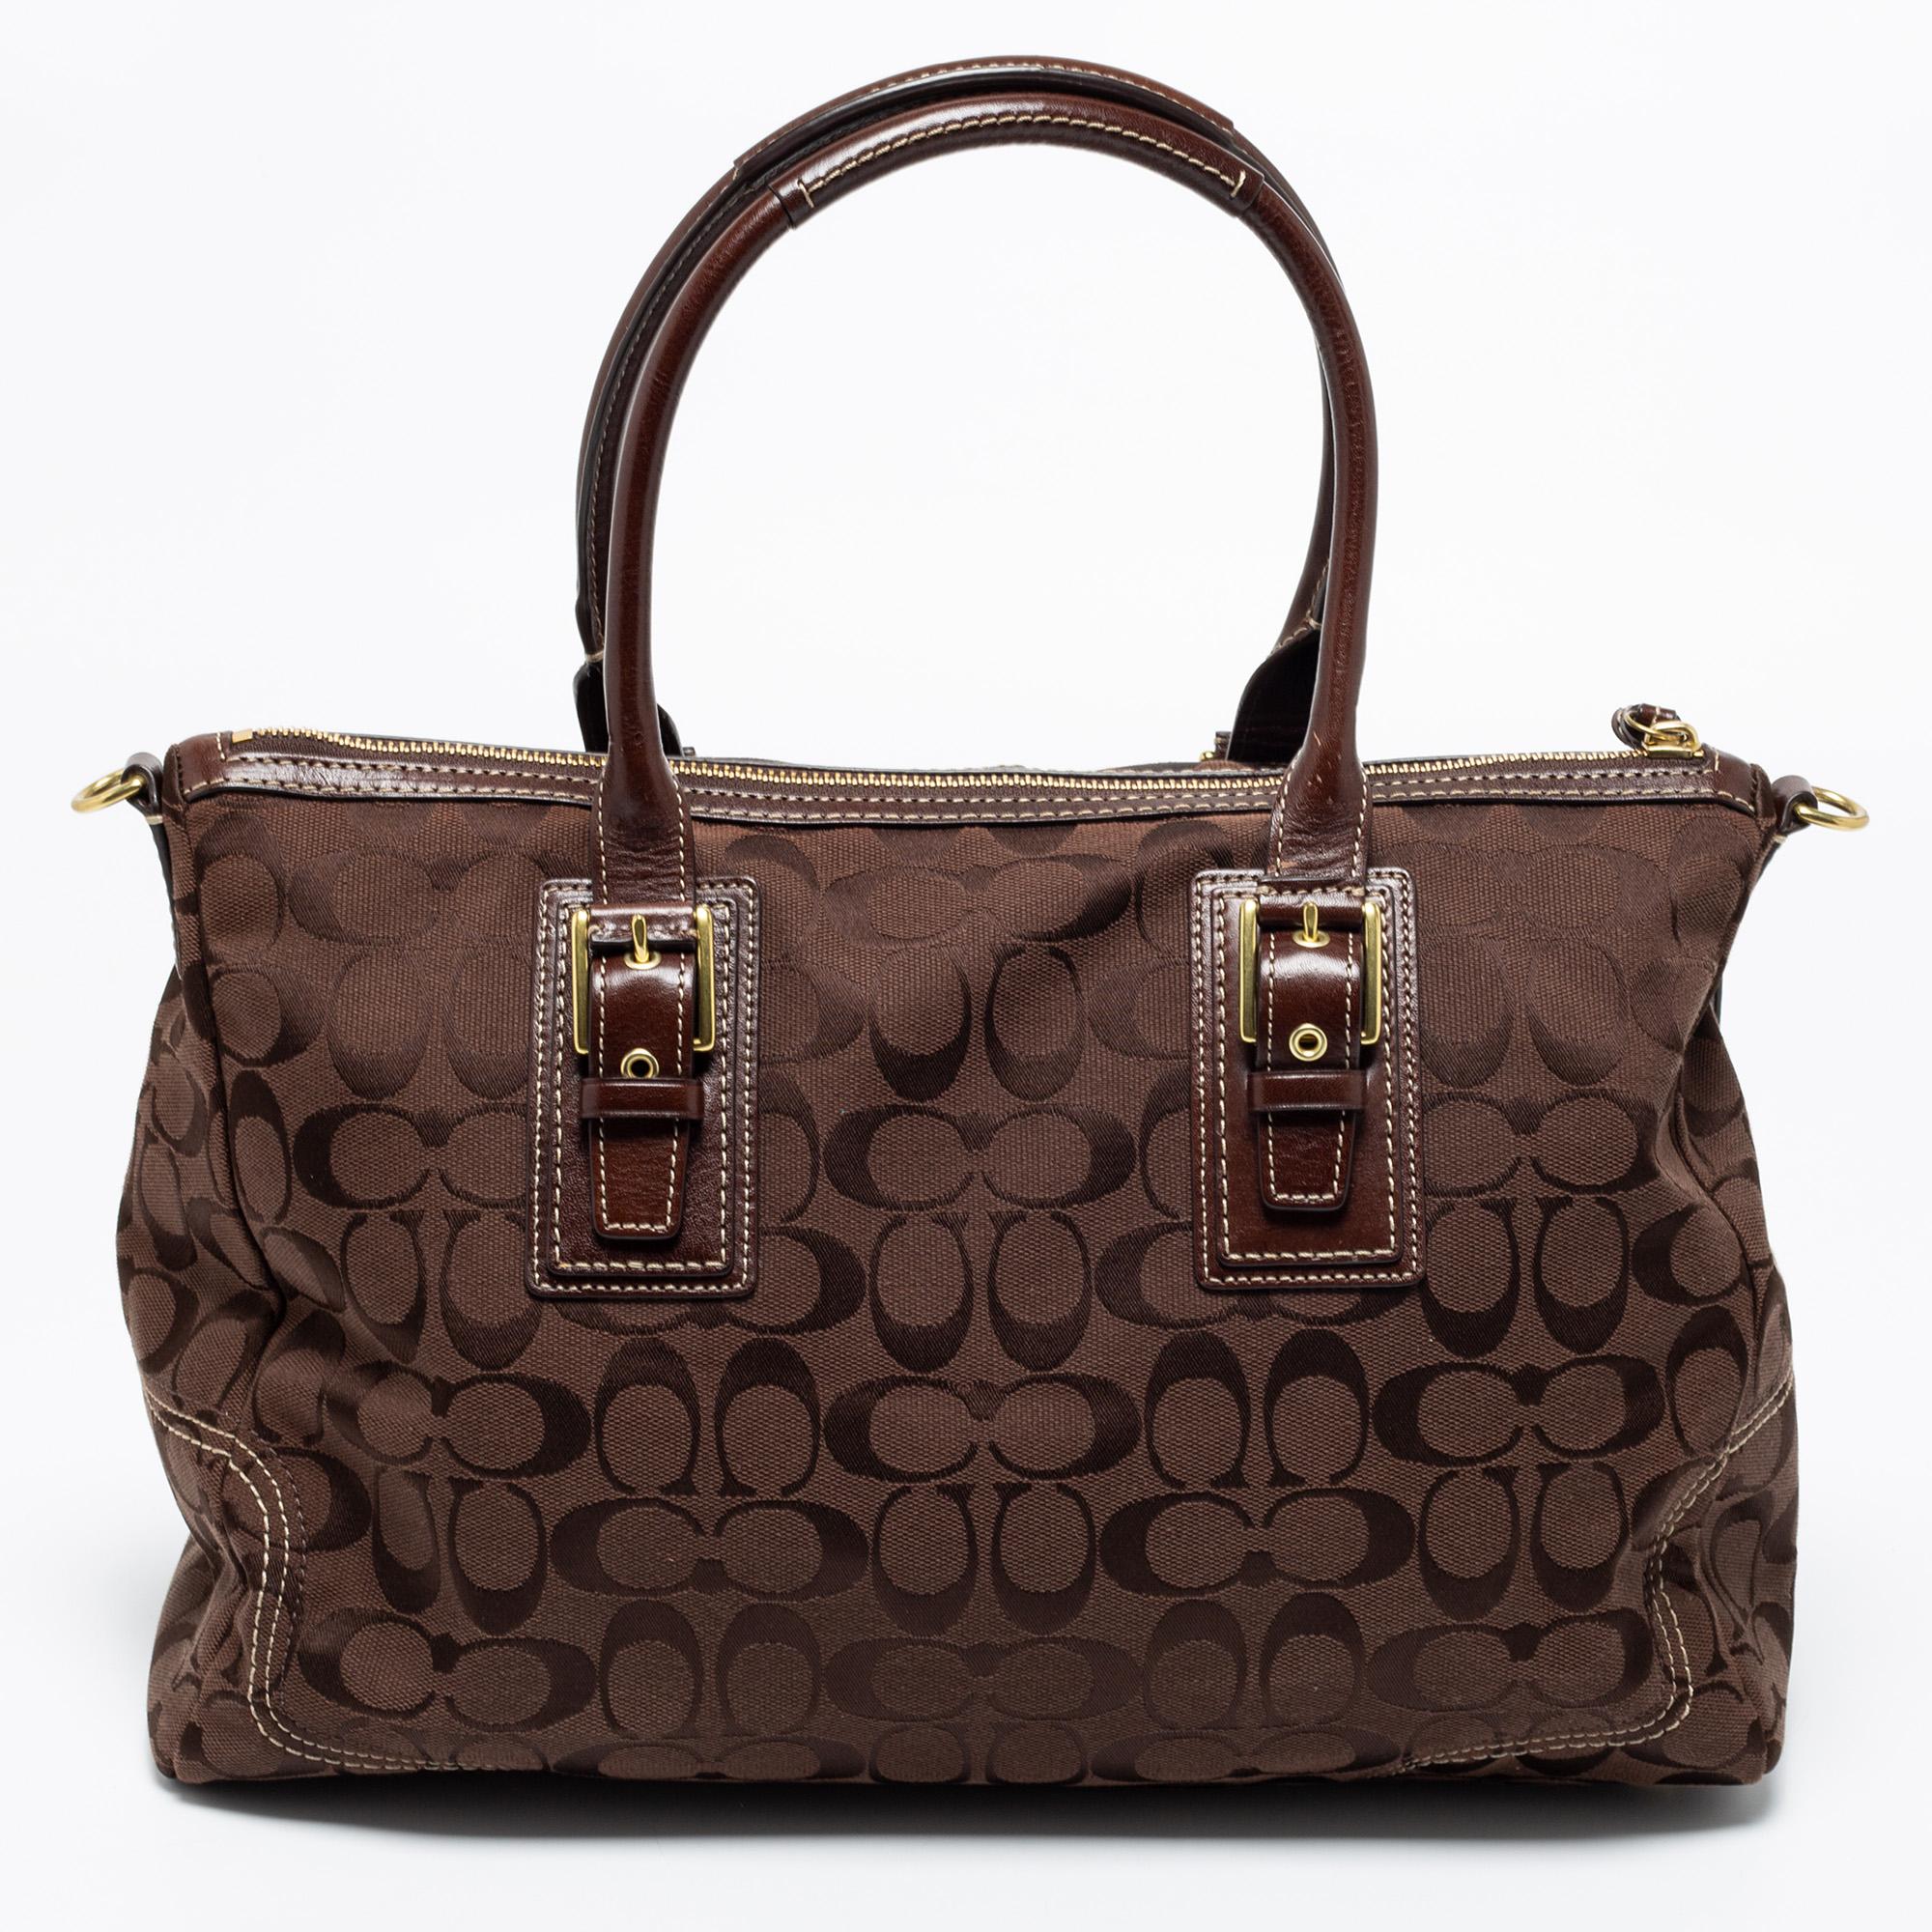 This beautiful bag from Coach is highly functional and full of charm. Crafted from signature coated canvas and leather, the brown bag features dual handles, a shoulder strap, and gold-tone hardware. The fabric-lined interior will hold all your